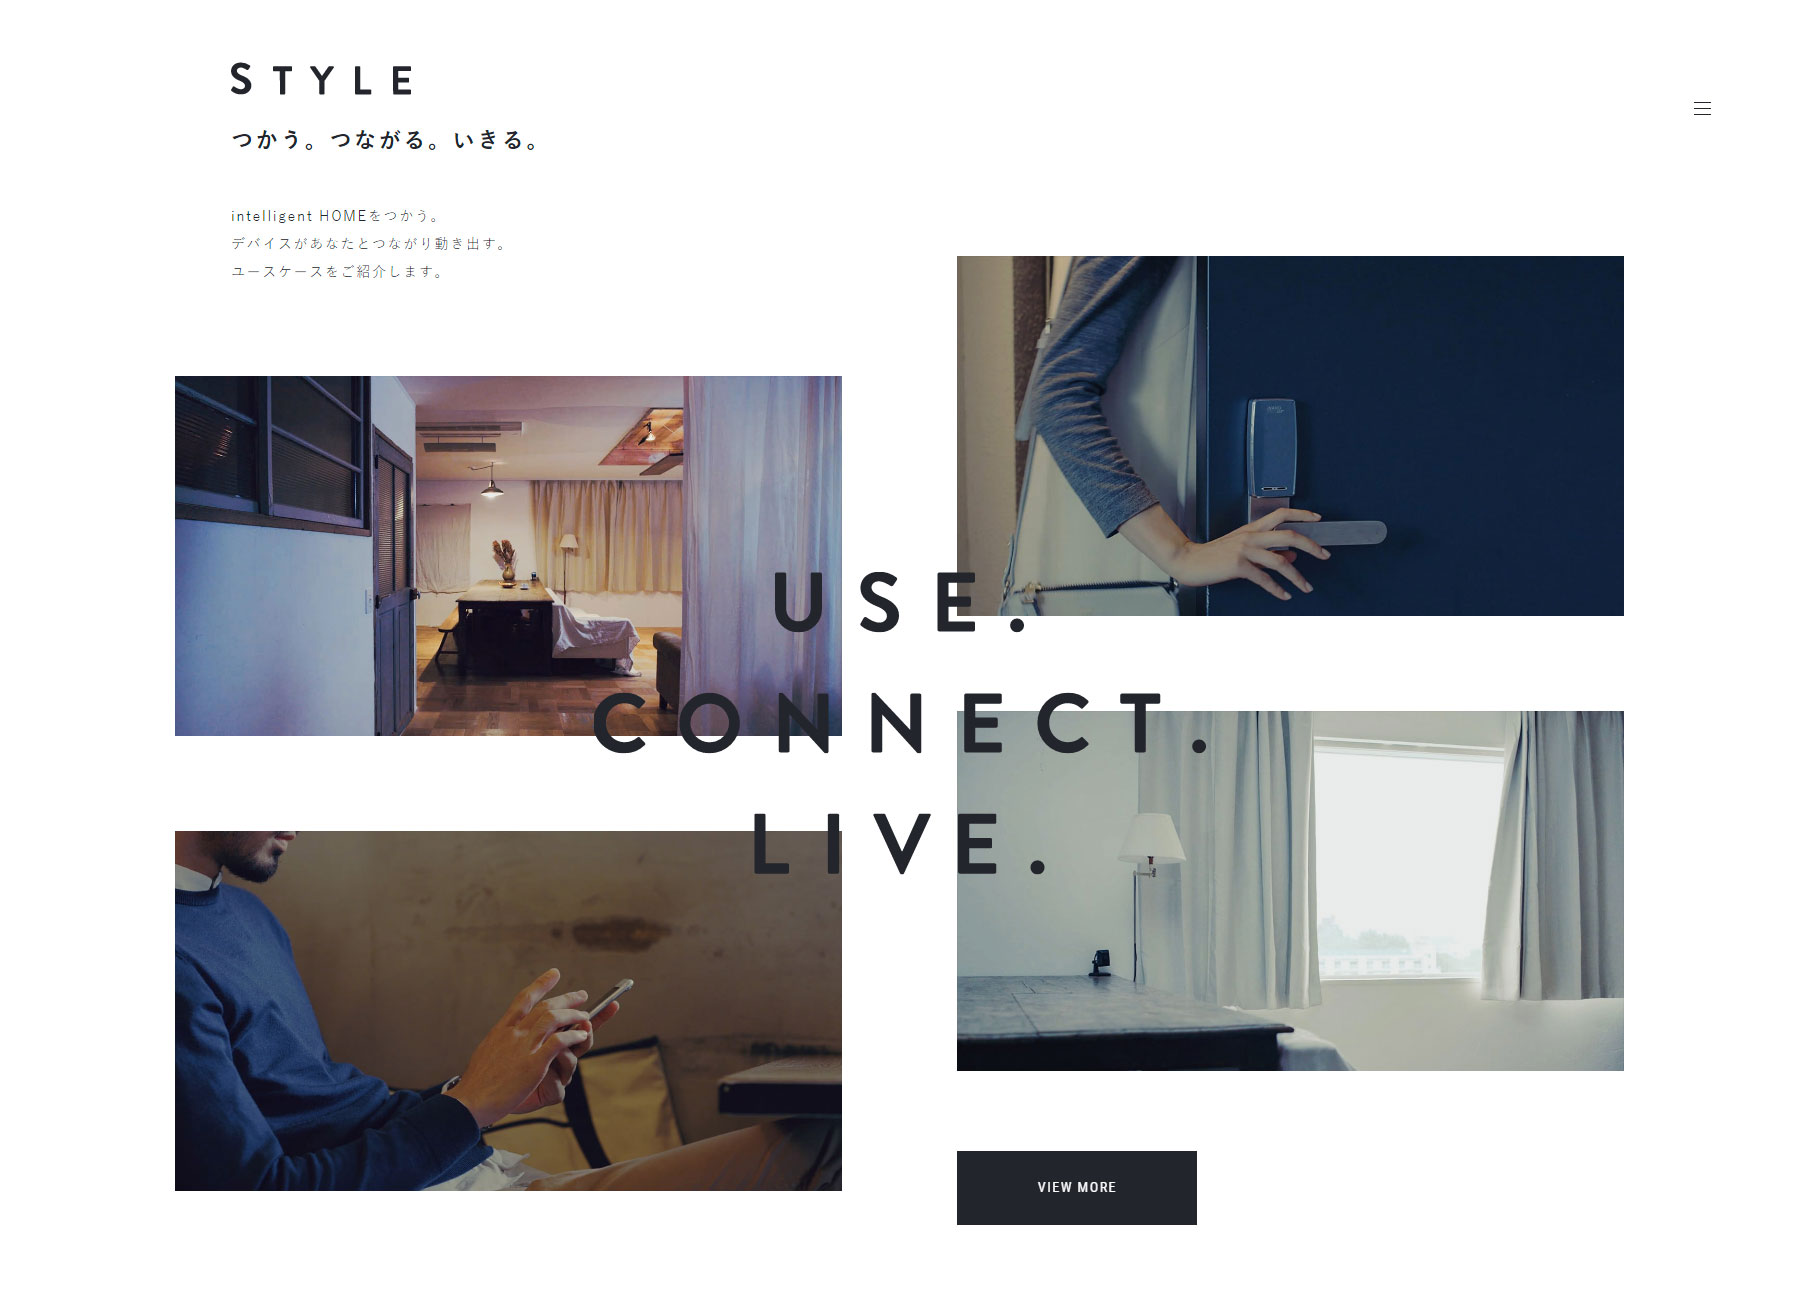 intelligentHOME - Website of the Day